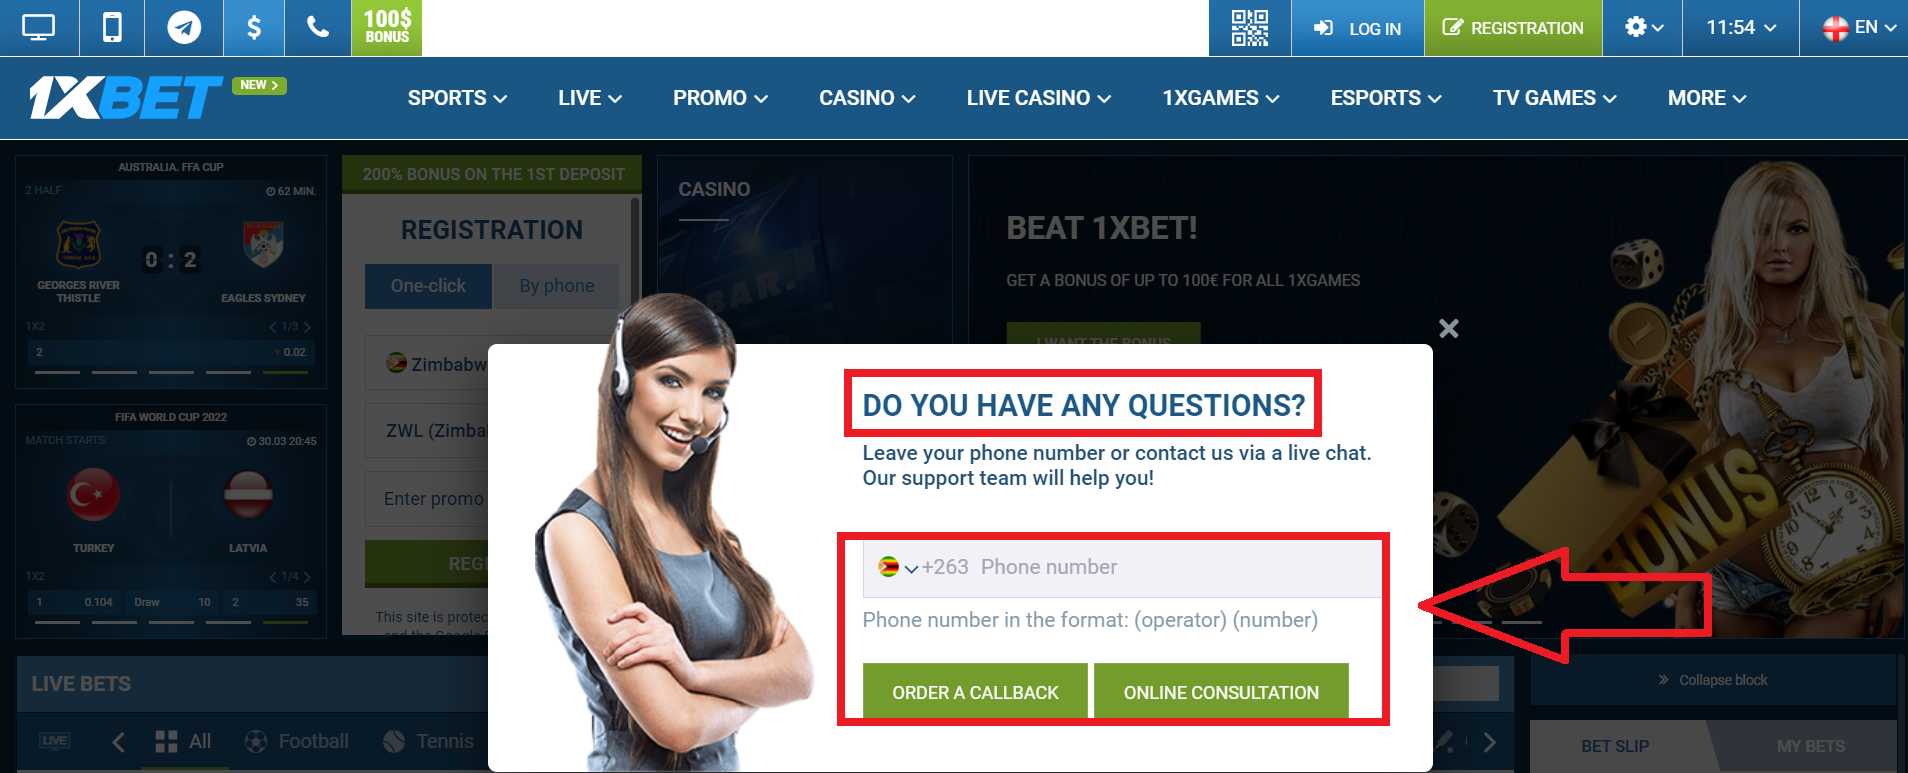 Which ways are used for registration in 1xBet?